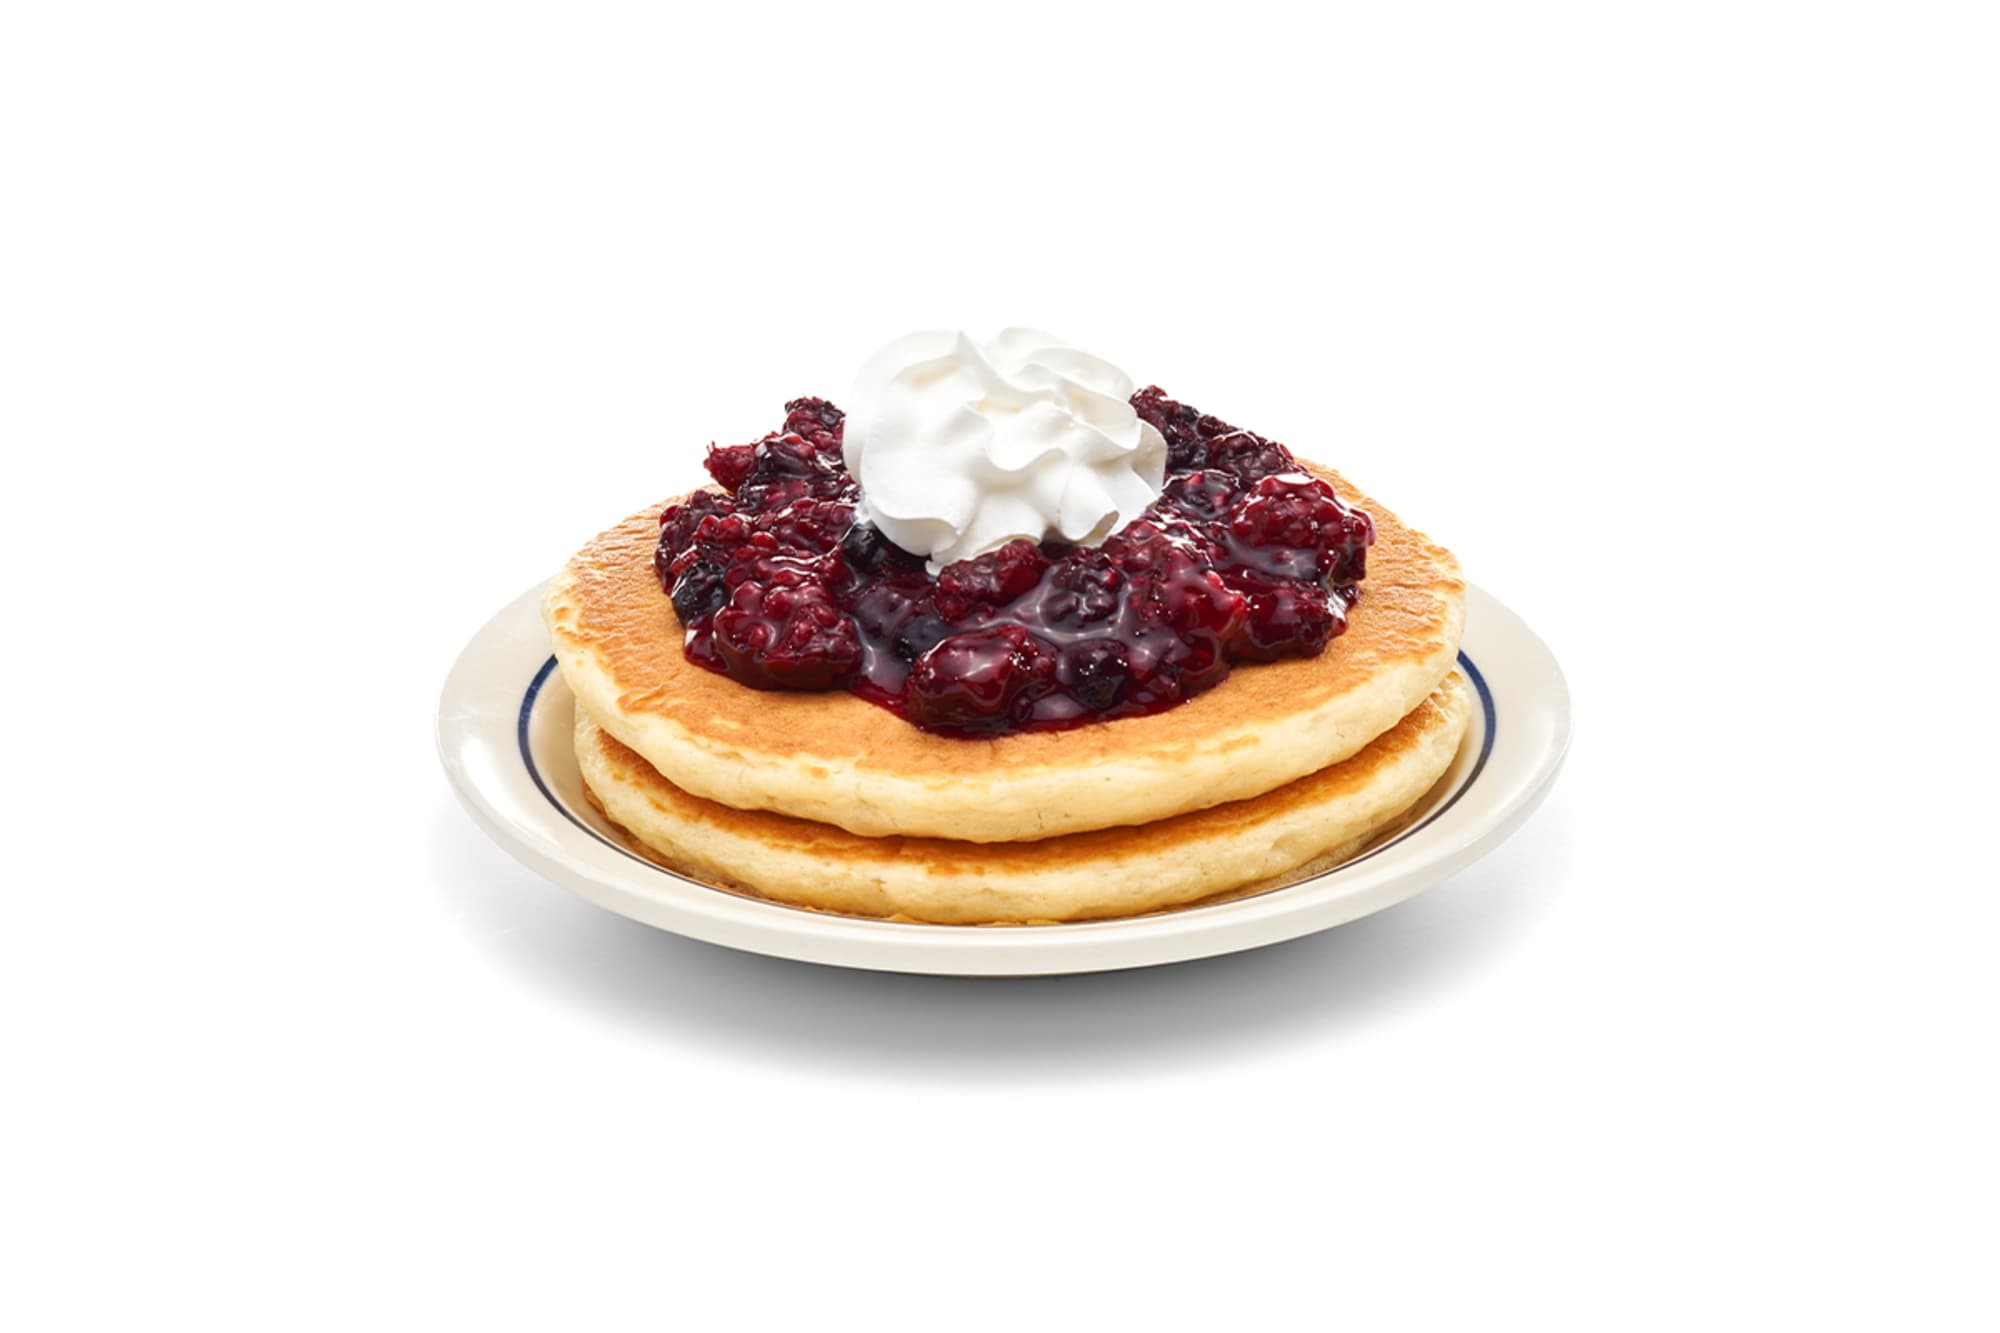  General Mills IHOP Blueberry and Syrup Mini Pancake